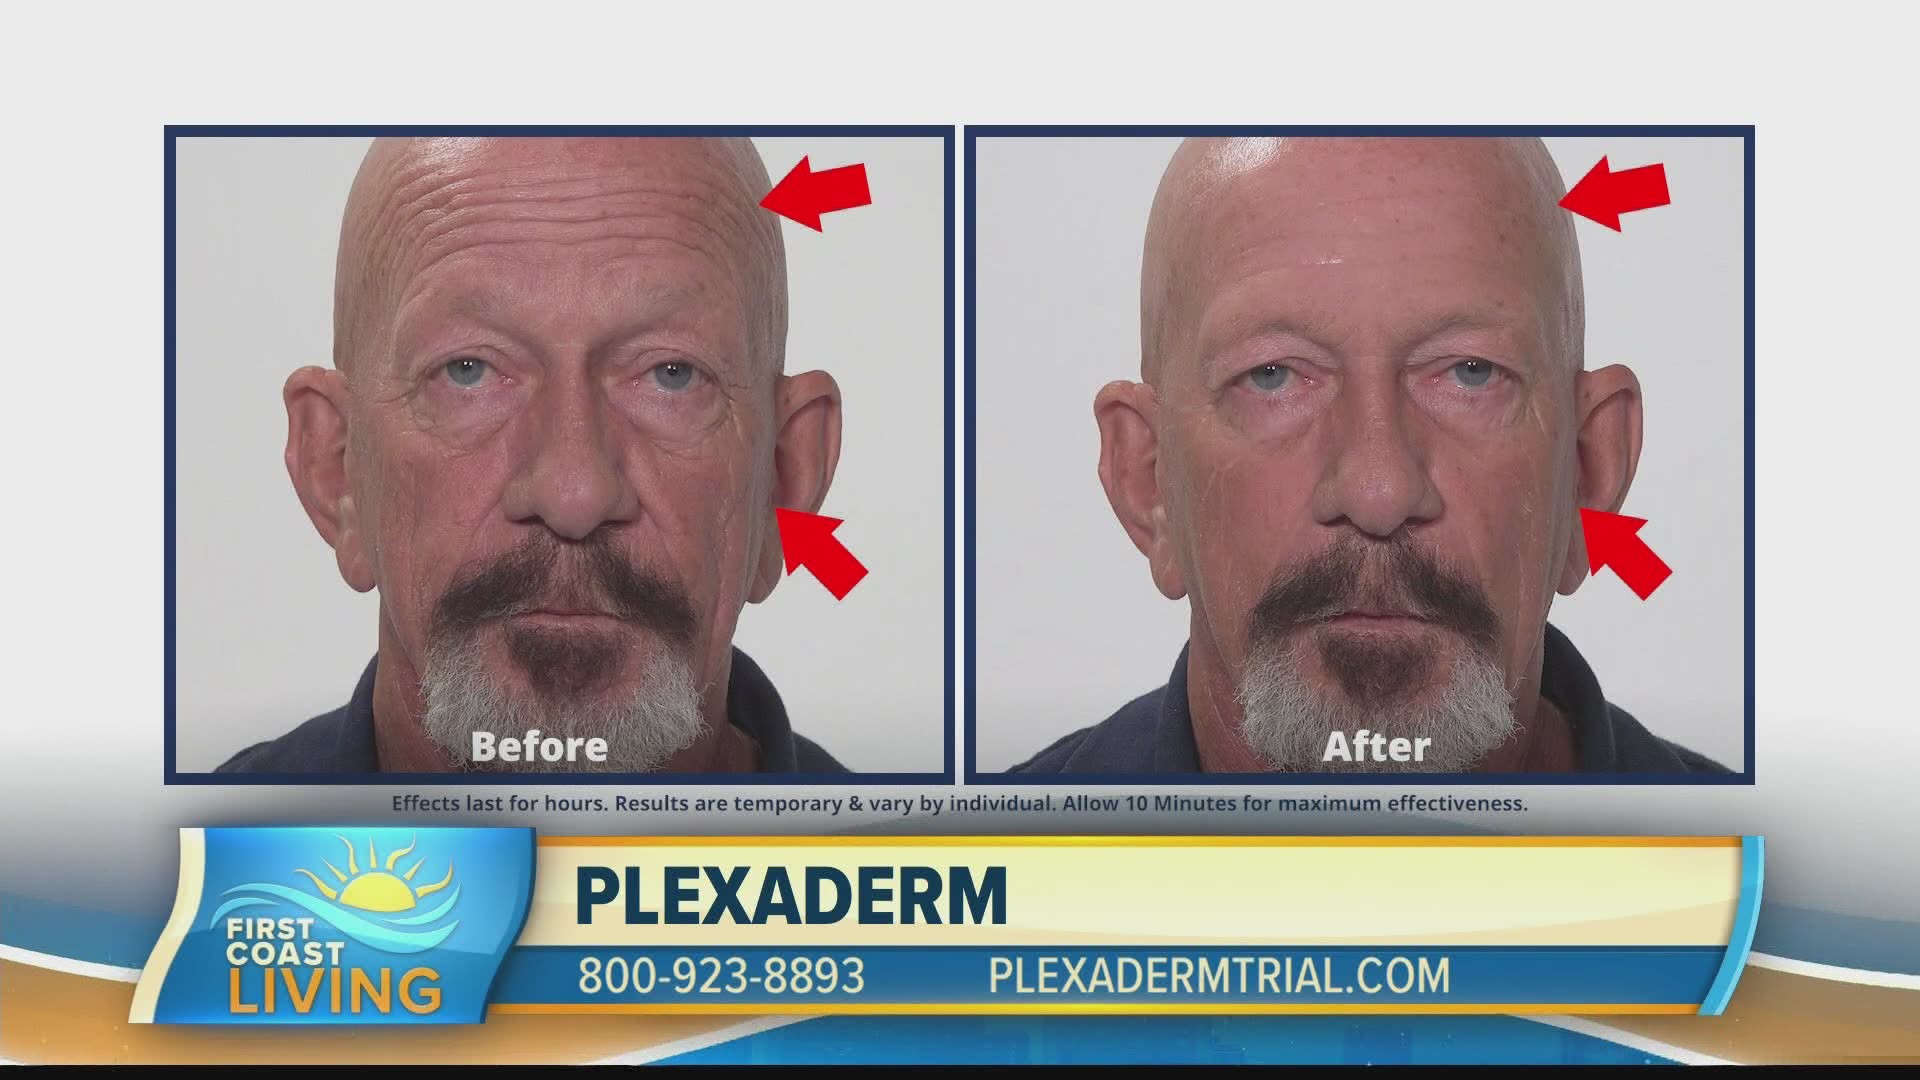 Plexaderm can help eliminate those key signs of aging.